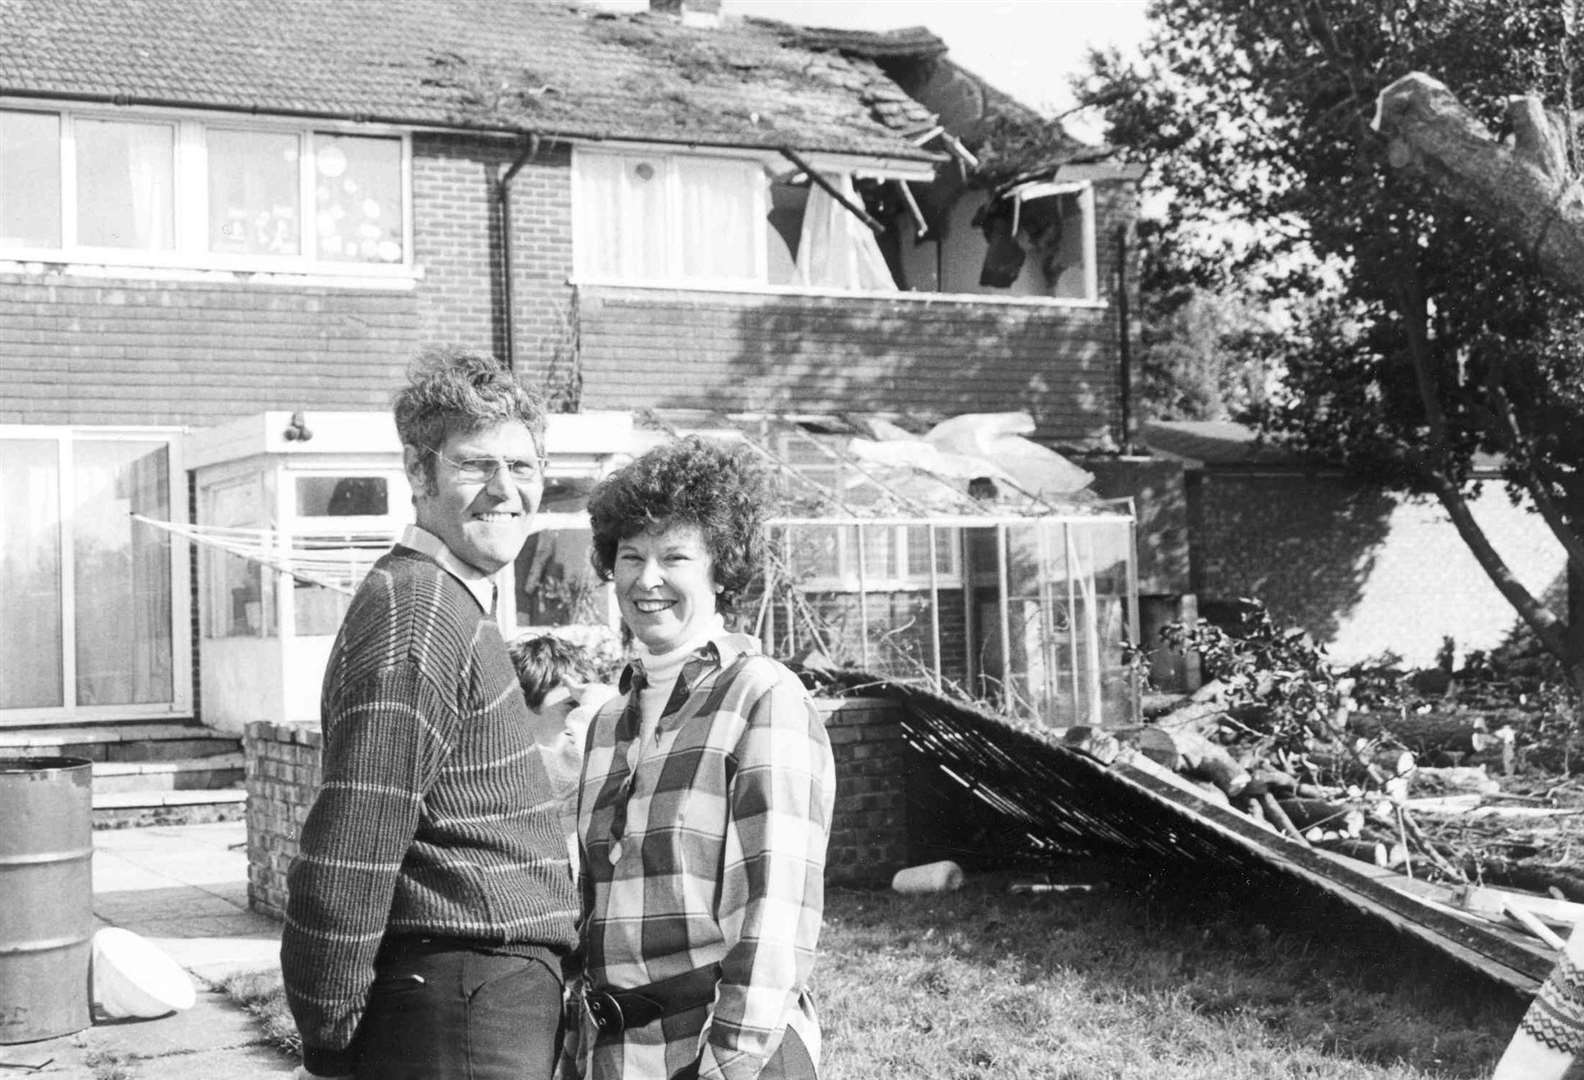 Funnily enough, it was this couple’s house which the tree referred to in the article crashed through – they used to run the off licence just across the road. They look surprisingly chipper given their home was crushed